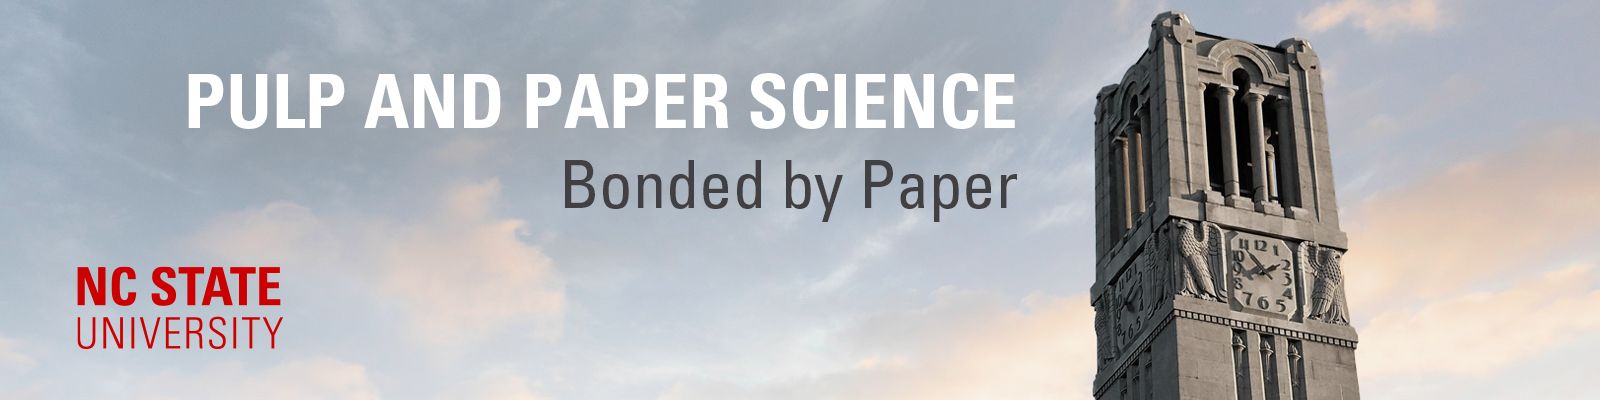 NC State Pulp and Paper Science "Bonded by Paper"